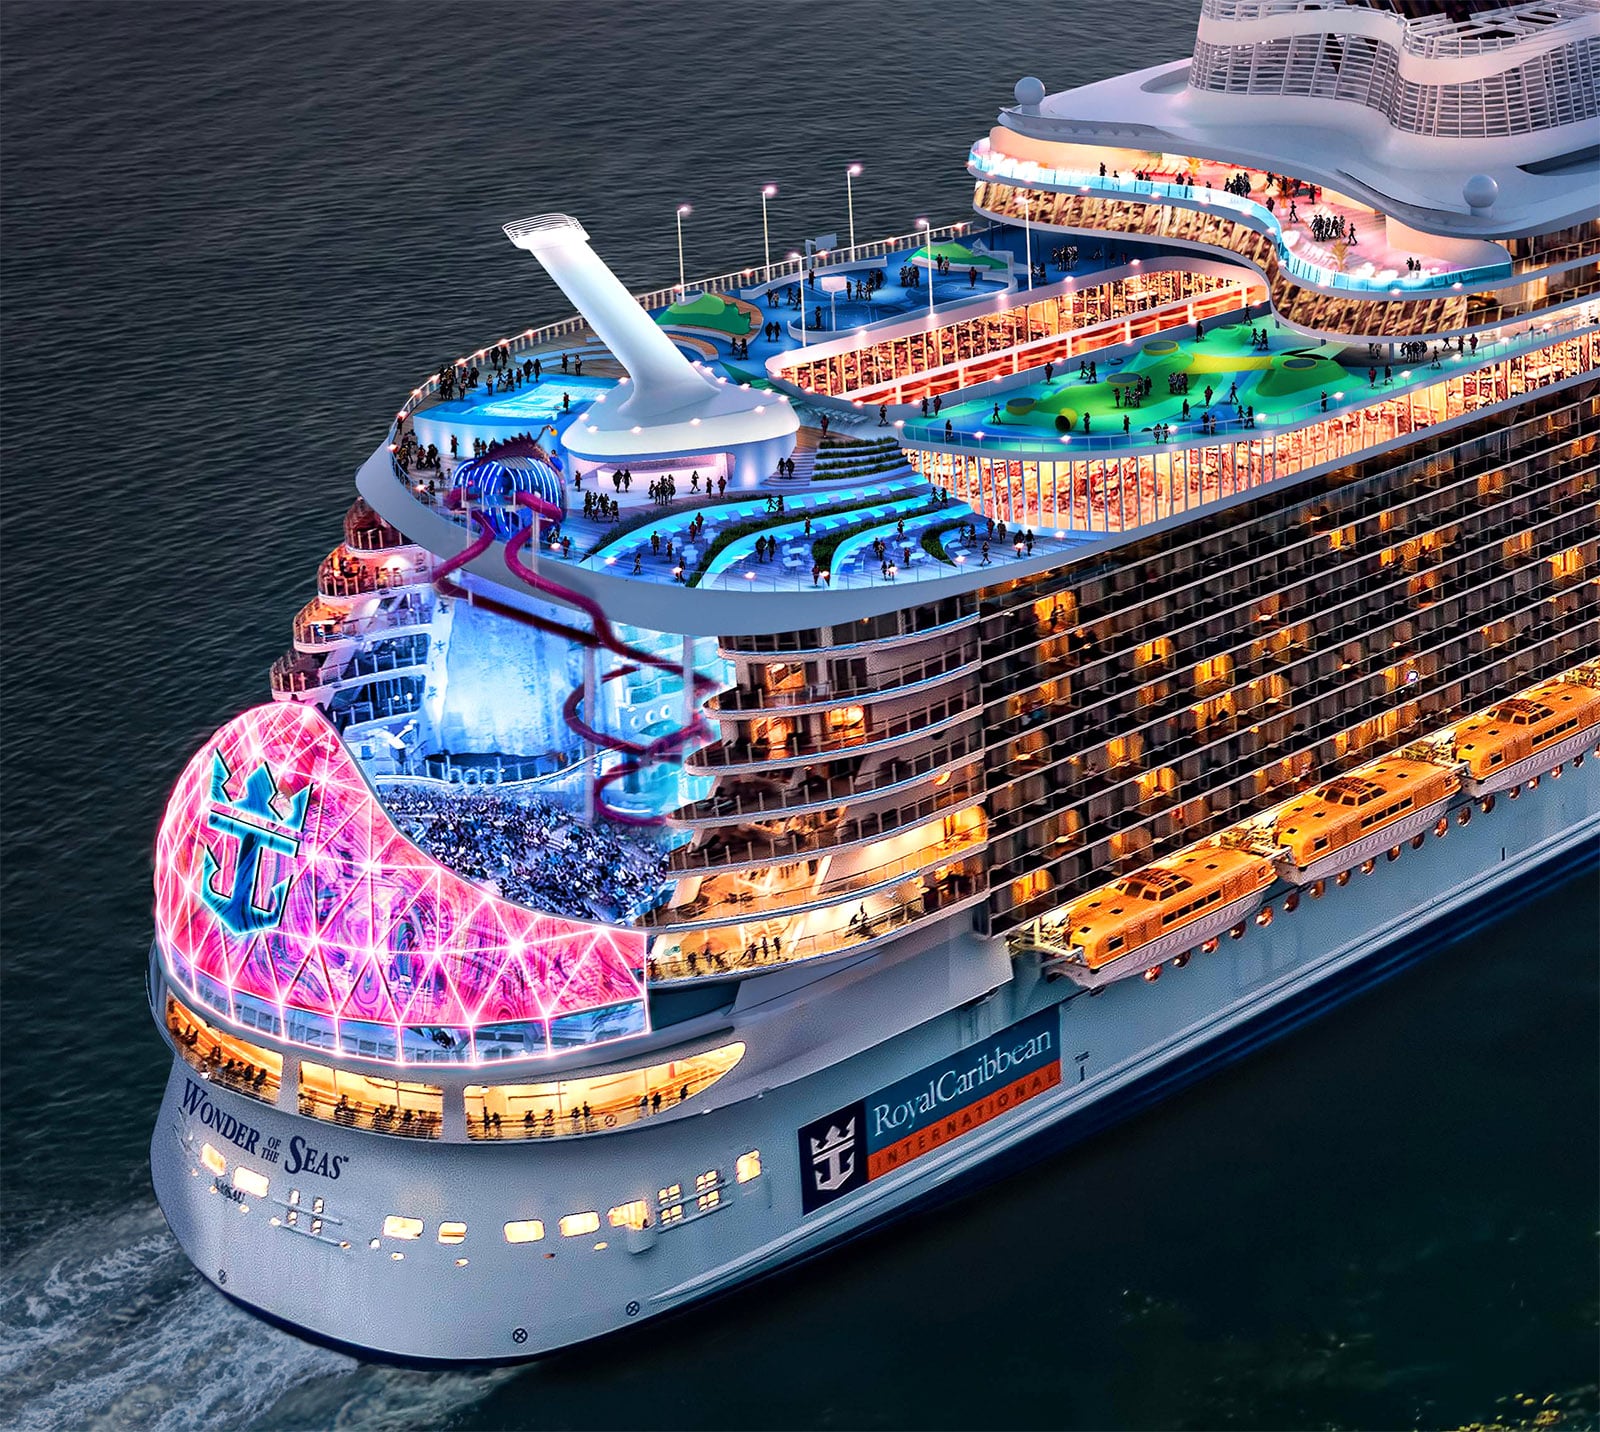 Royal Caribbean announces new Oasis Class ship will be Wonder of the